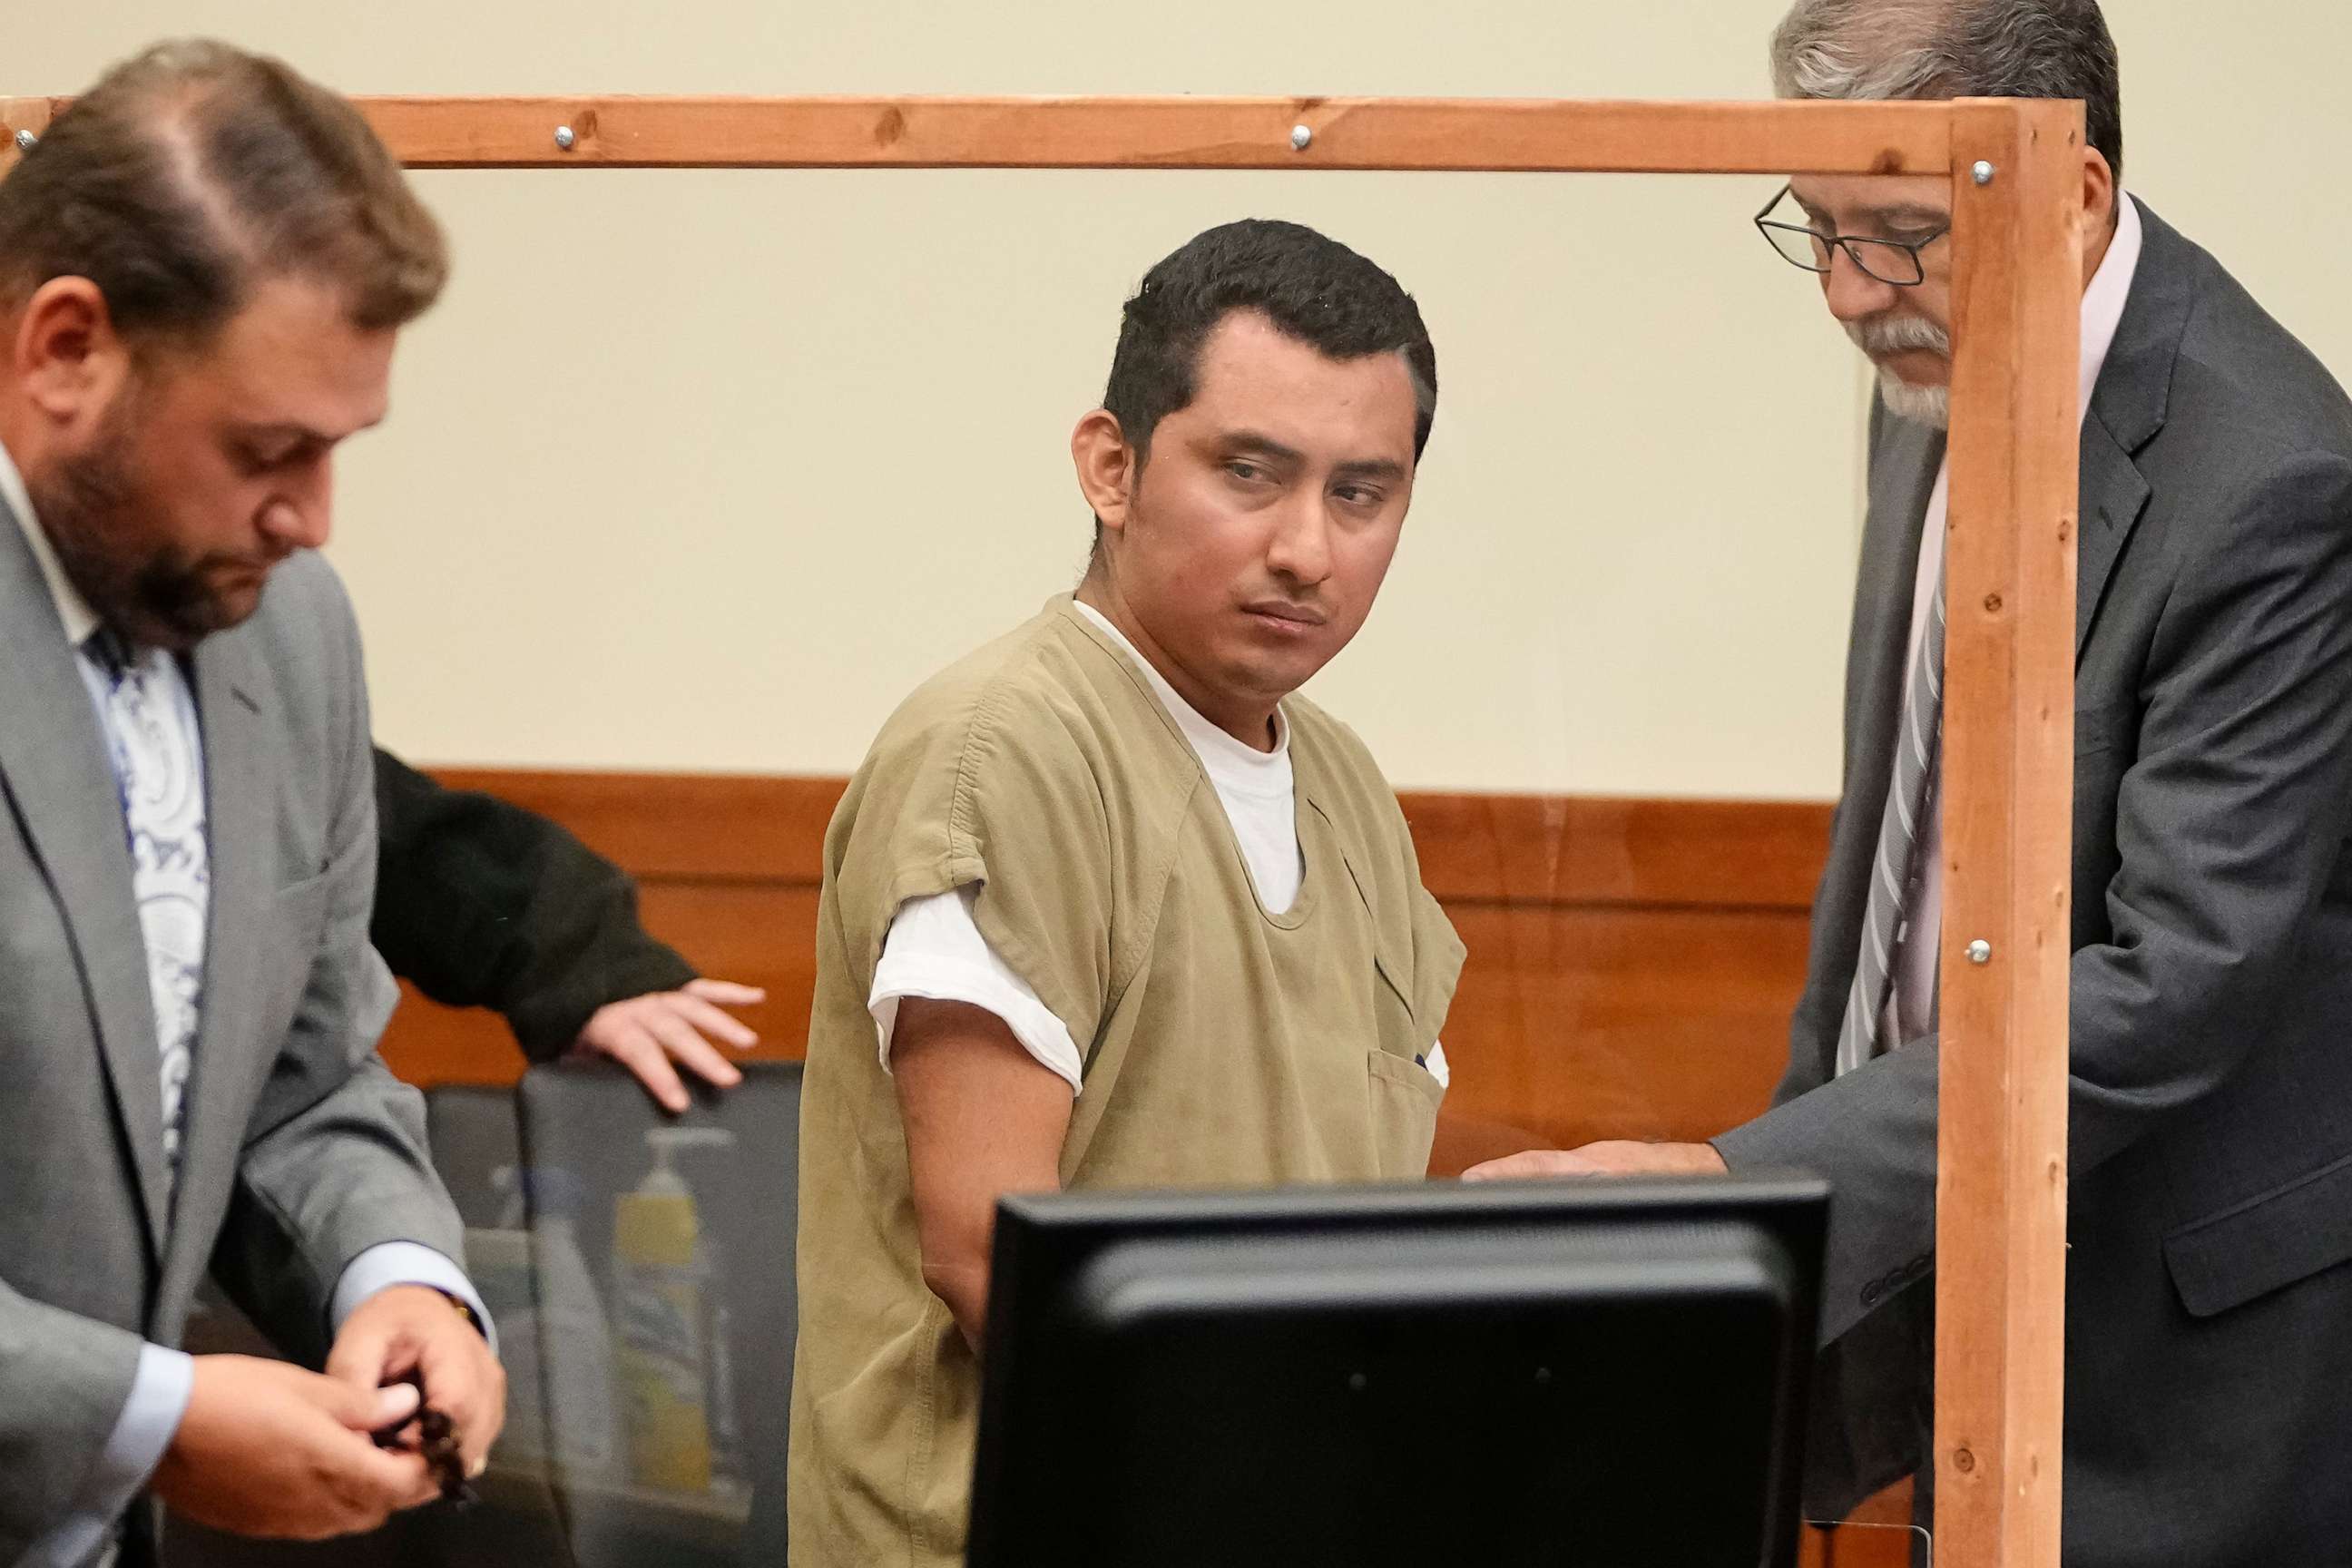 PHOTO: Gerson Fuentes, the man who plead guilty to raping and impregnating a 10-year-old Columbus girl before she traveled to Indiana for an abortion, appears in court, July 5, 2023, in Columbus, Ohio.